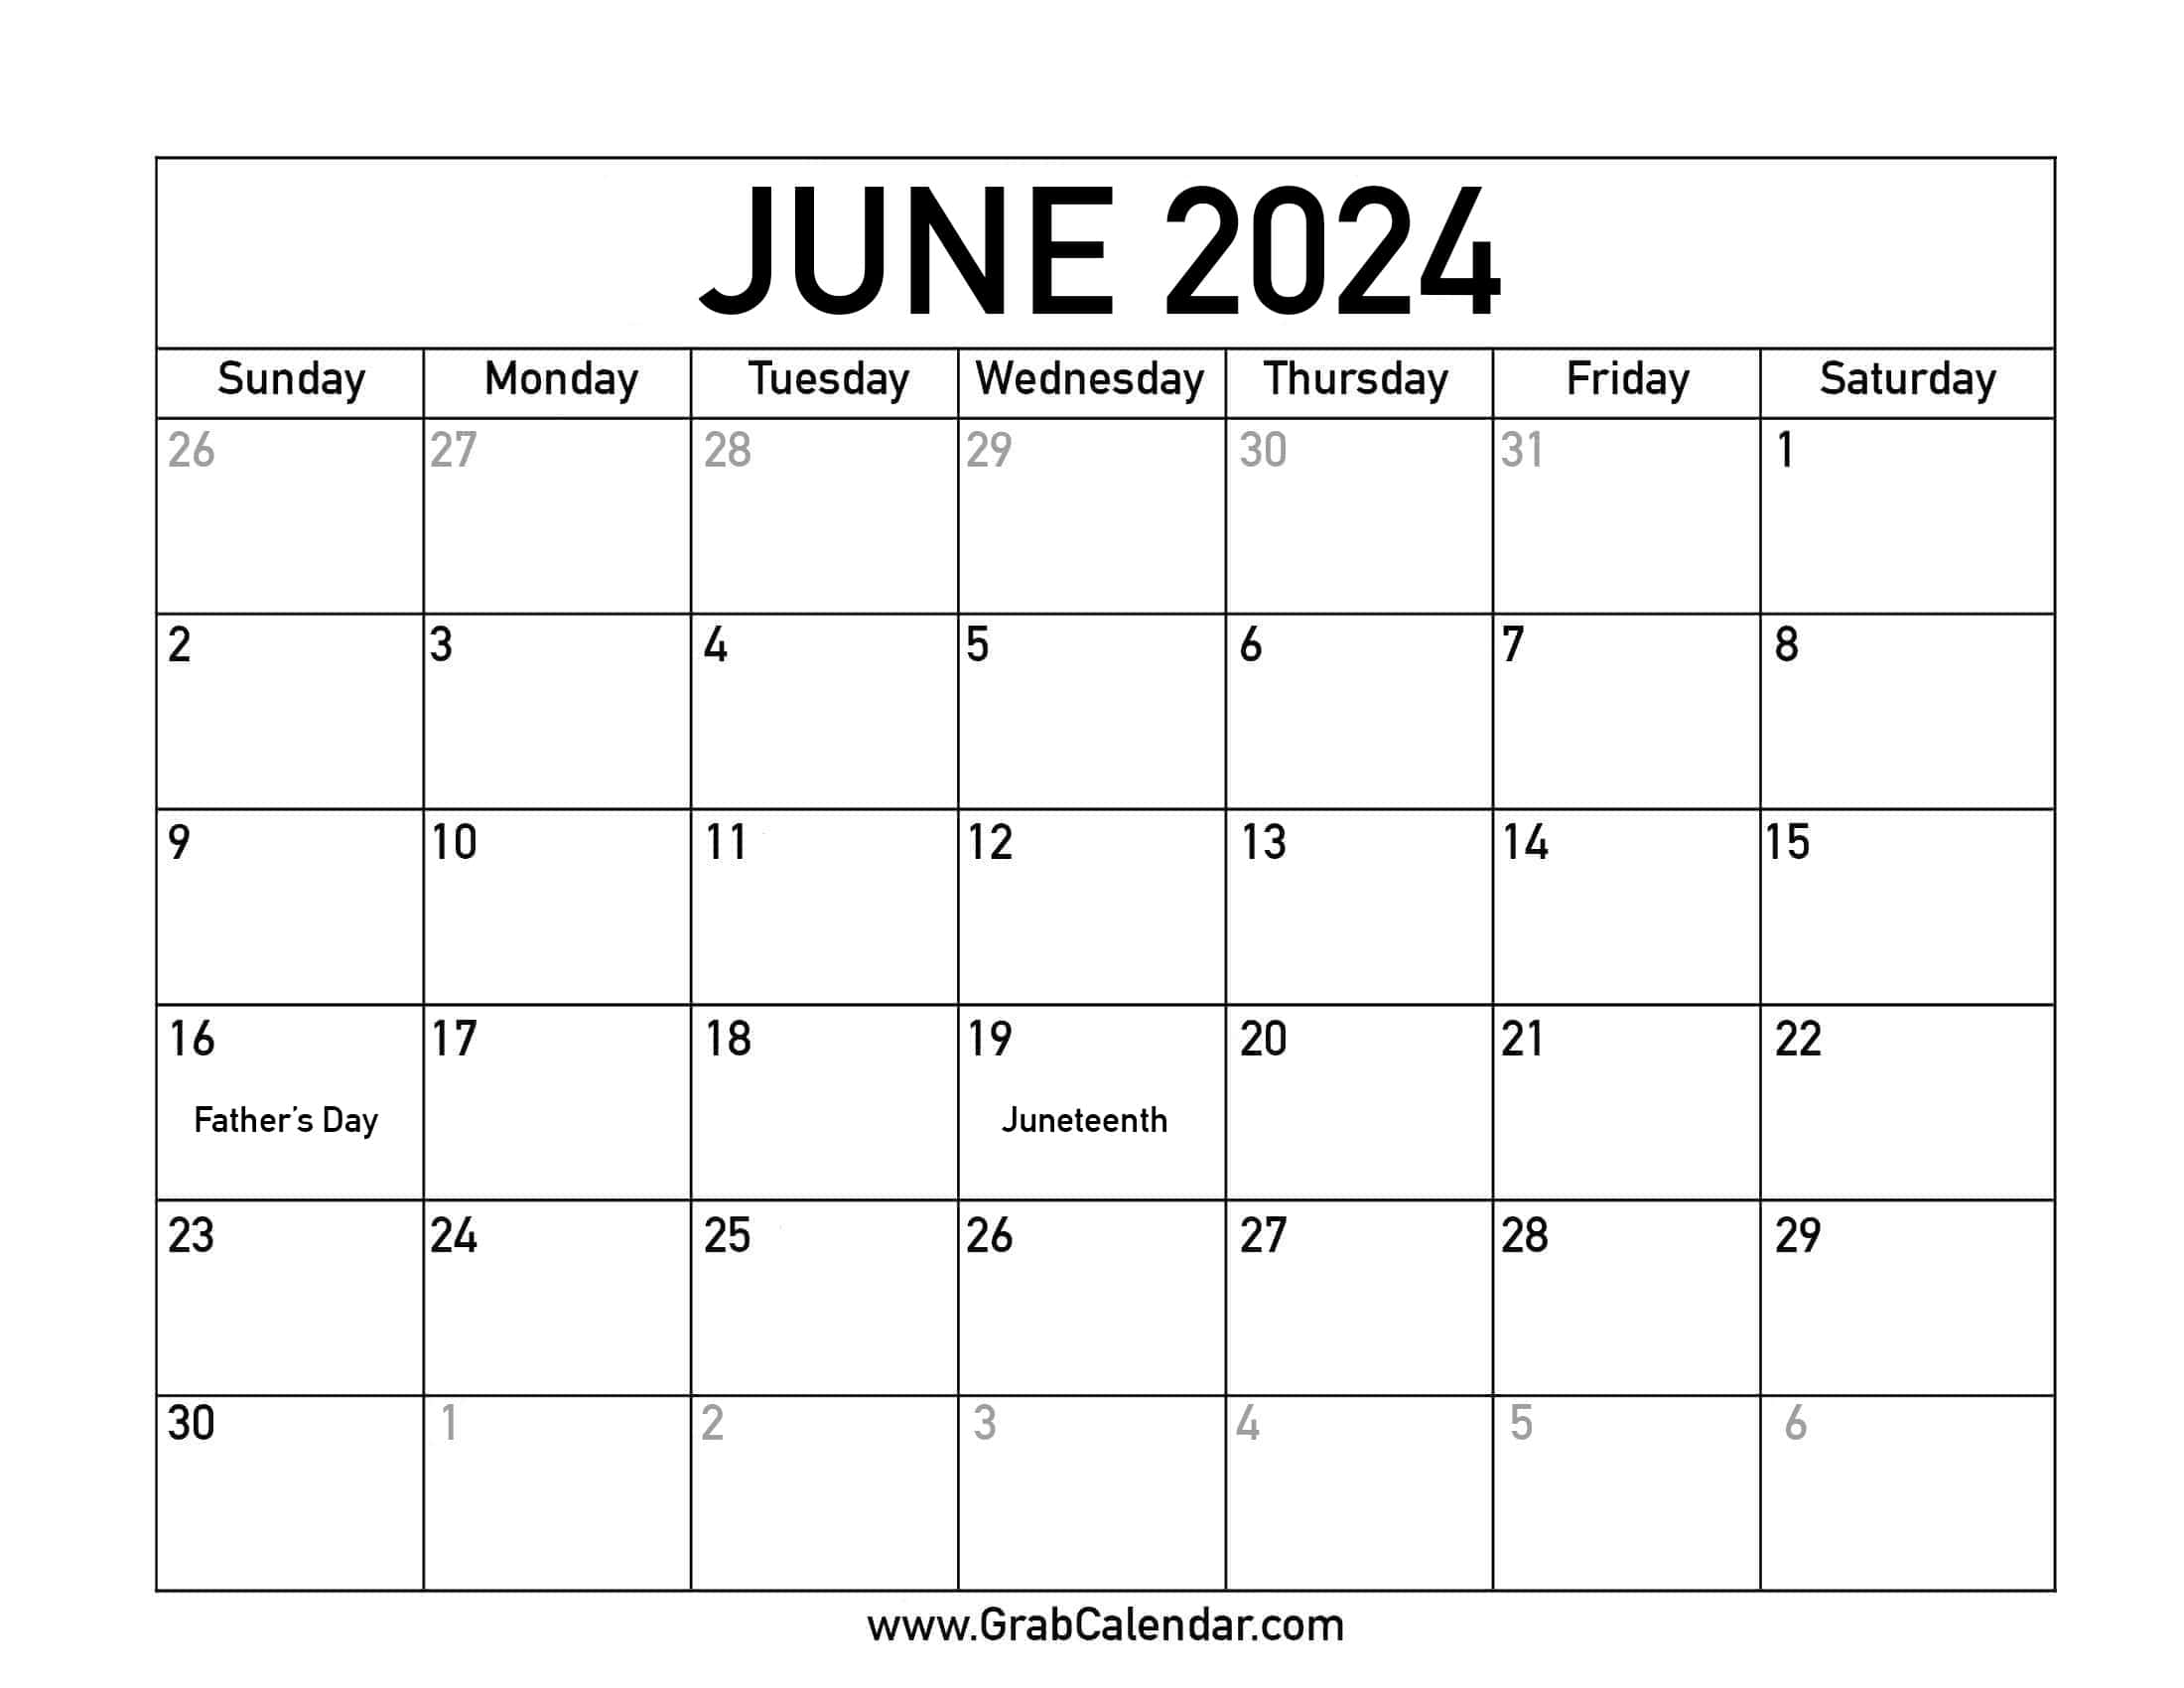 June 2024 Important Days - Betsy Charity